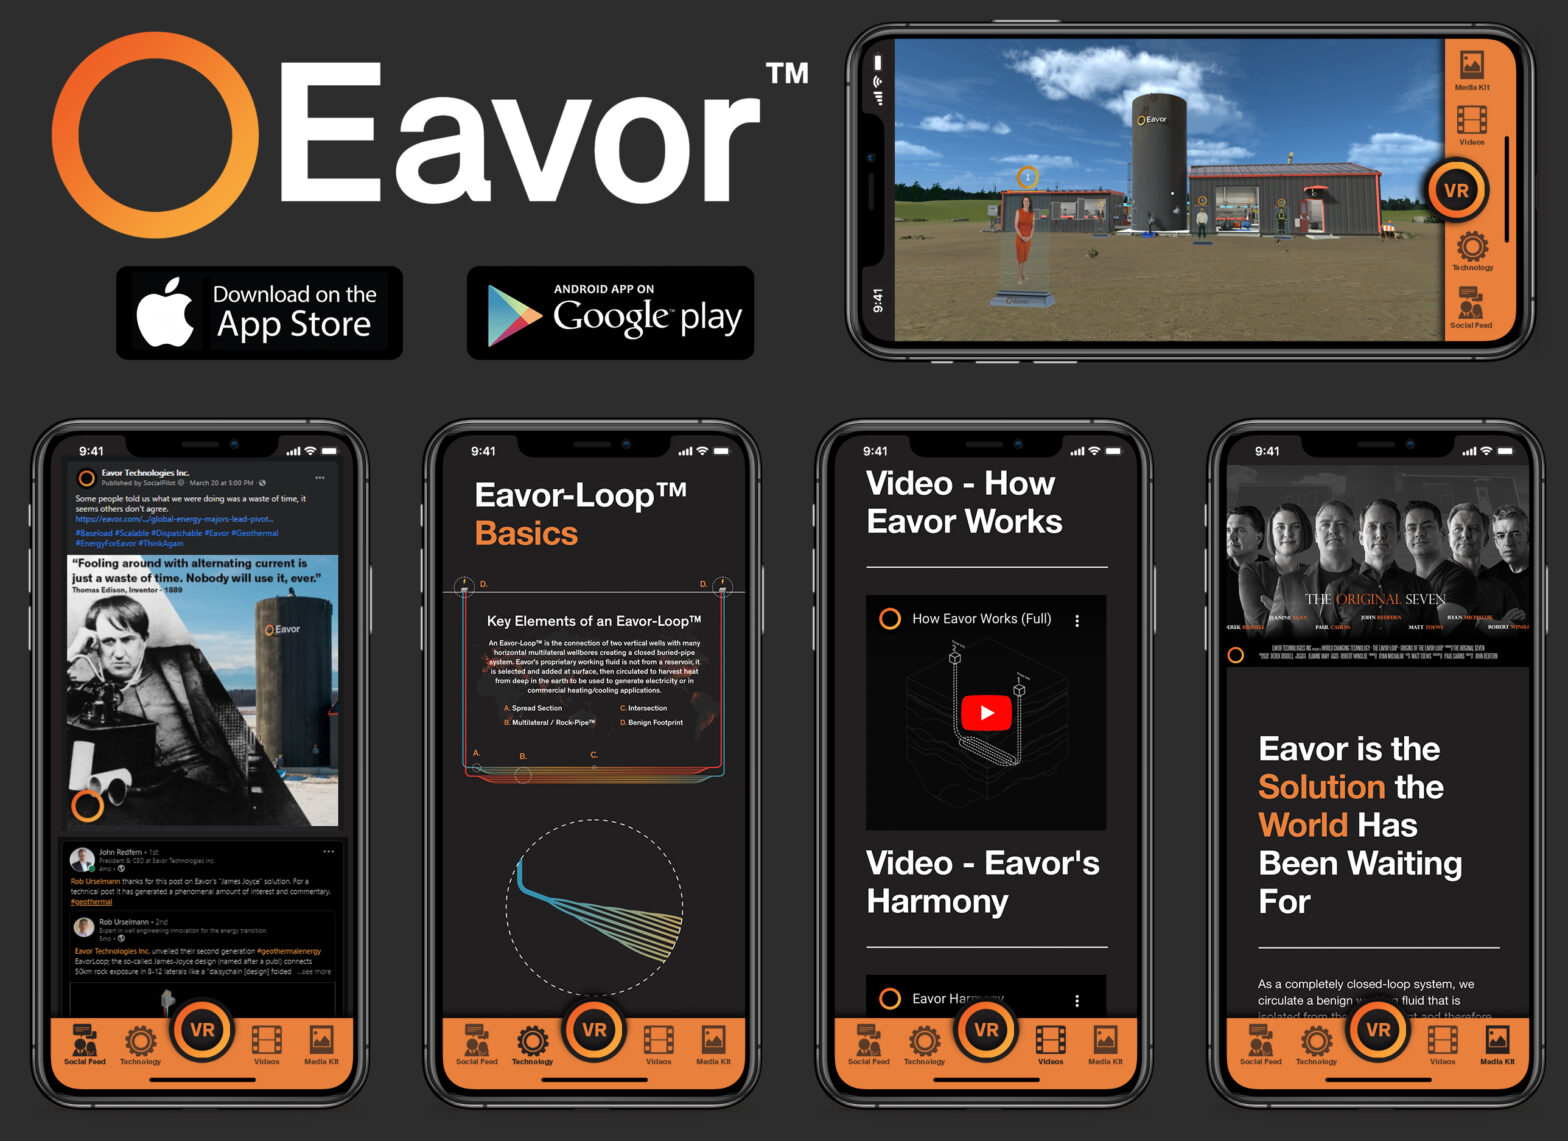 Eavor Mobile App Now Available